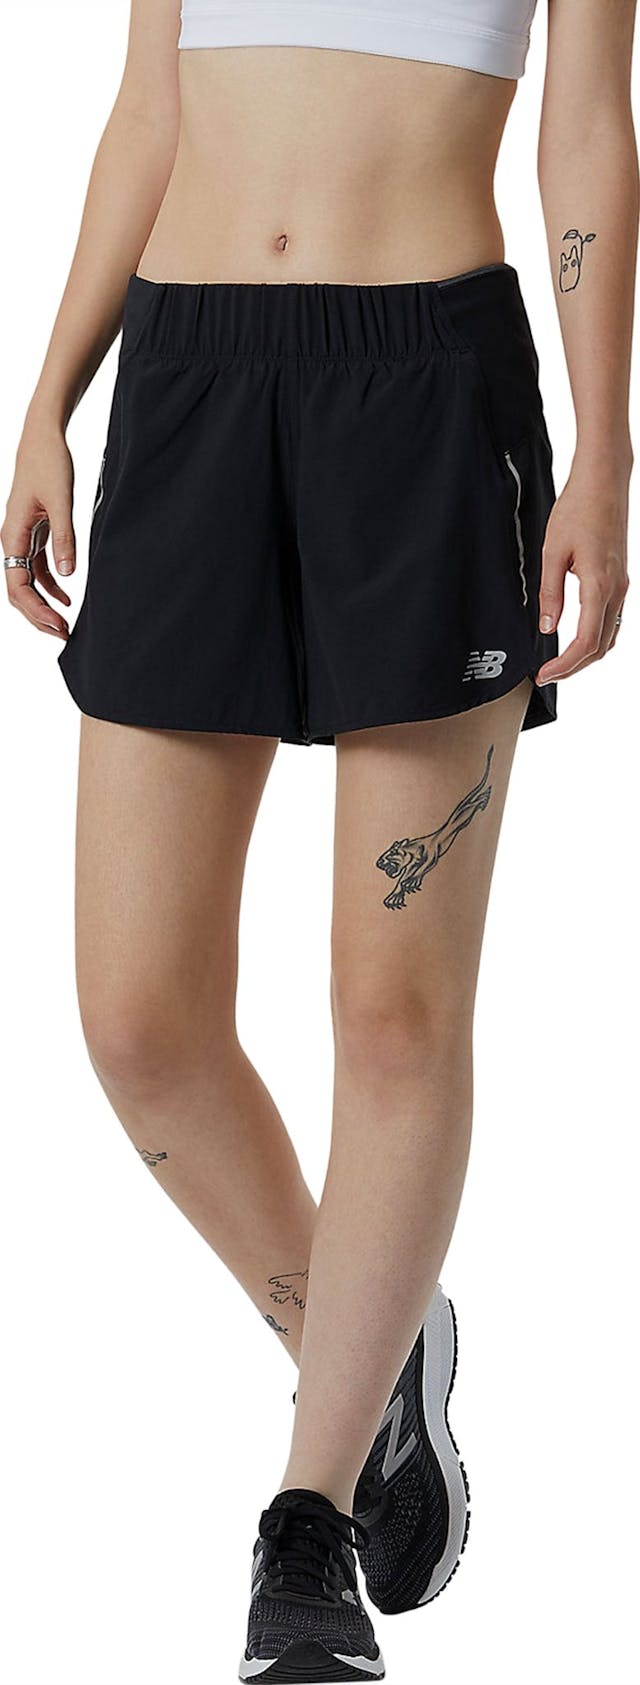 Product image for Impact Run 5 In Short - Women's